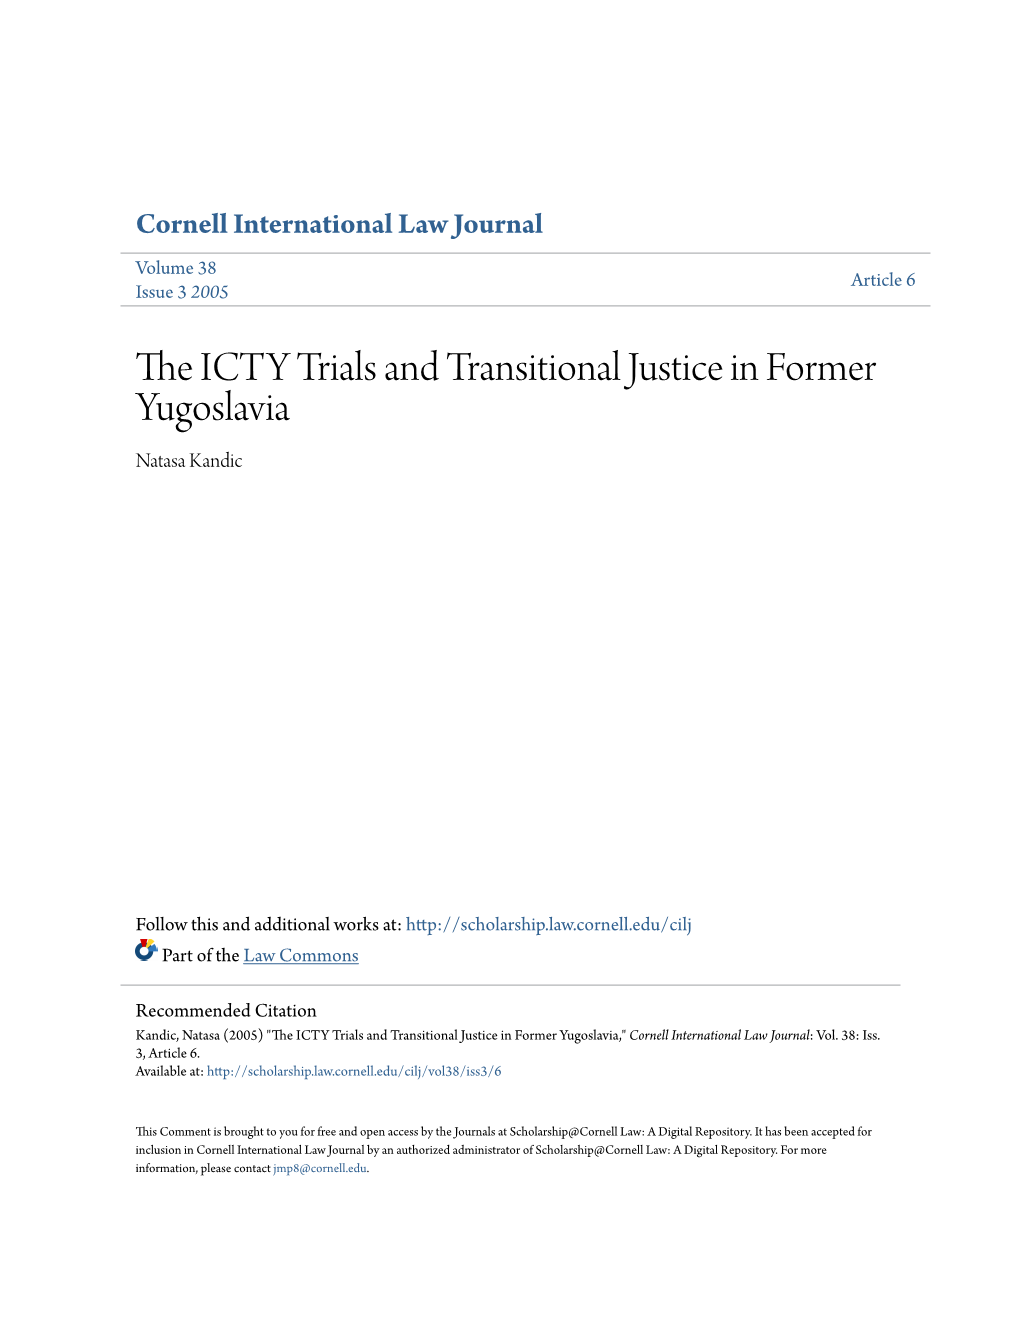 The ICTY Trials and Transitional Justice in Former Yugoslavia Natasa Kandic